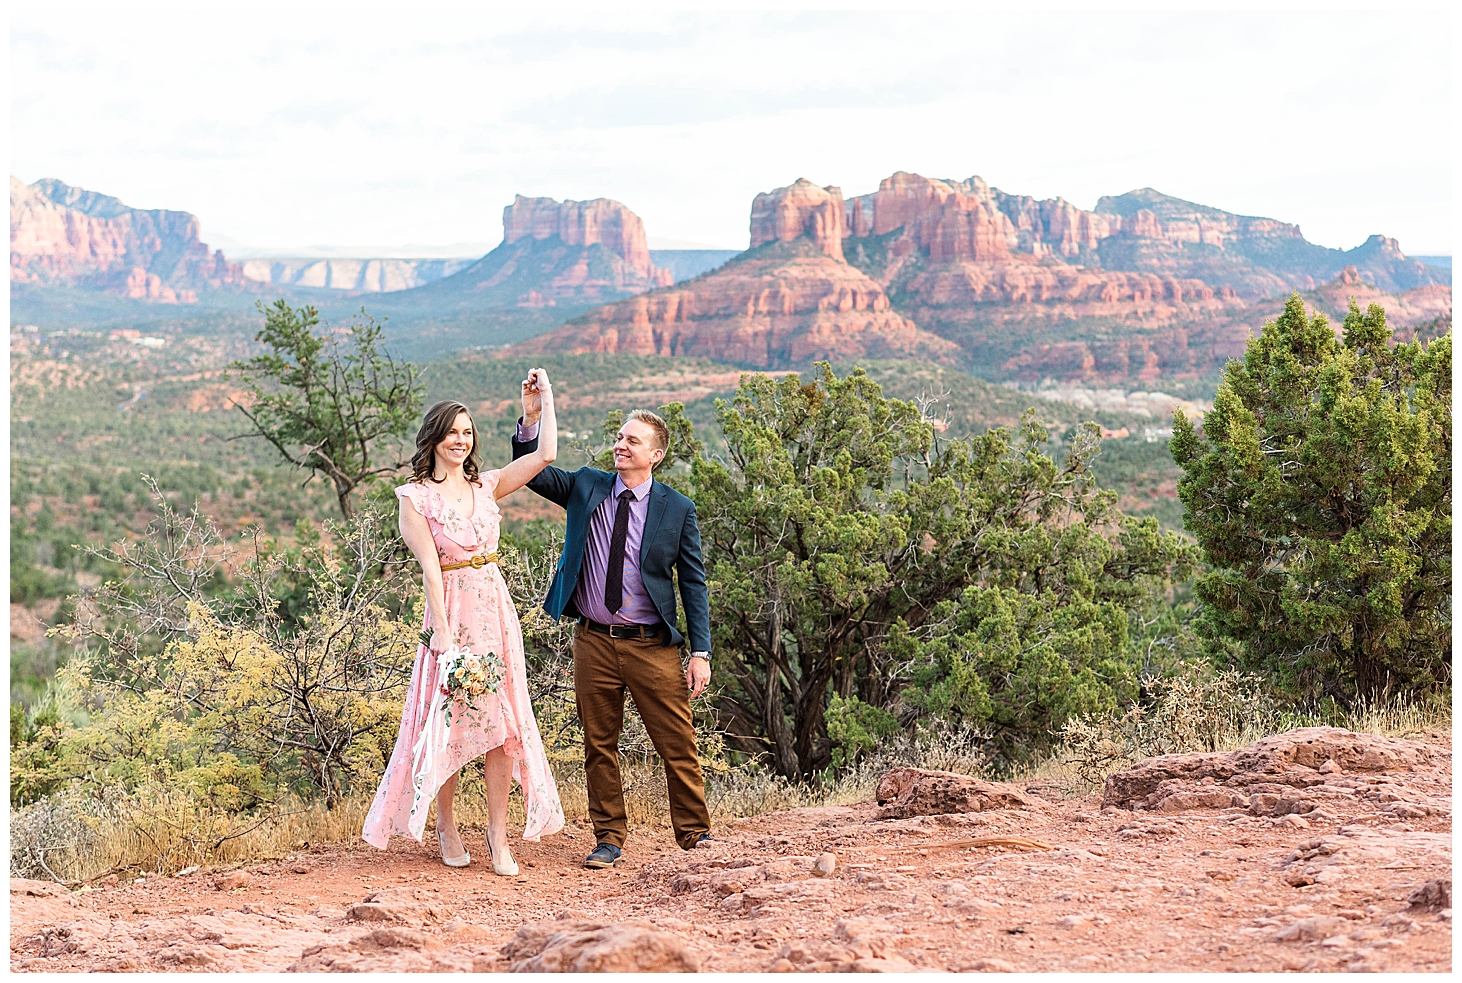 Couple dancing on cliff edge after getting engaged in Sedona, Arizona